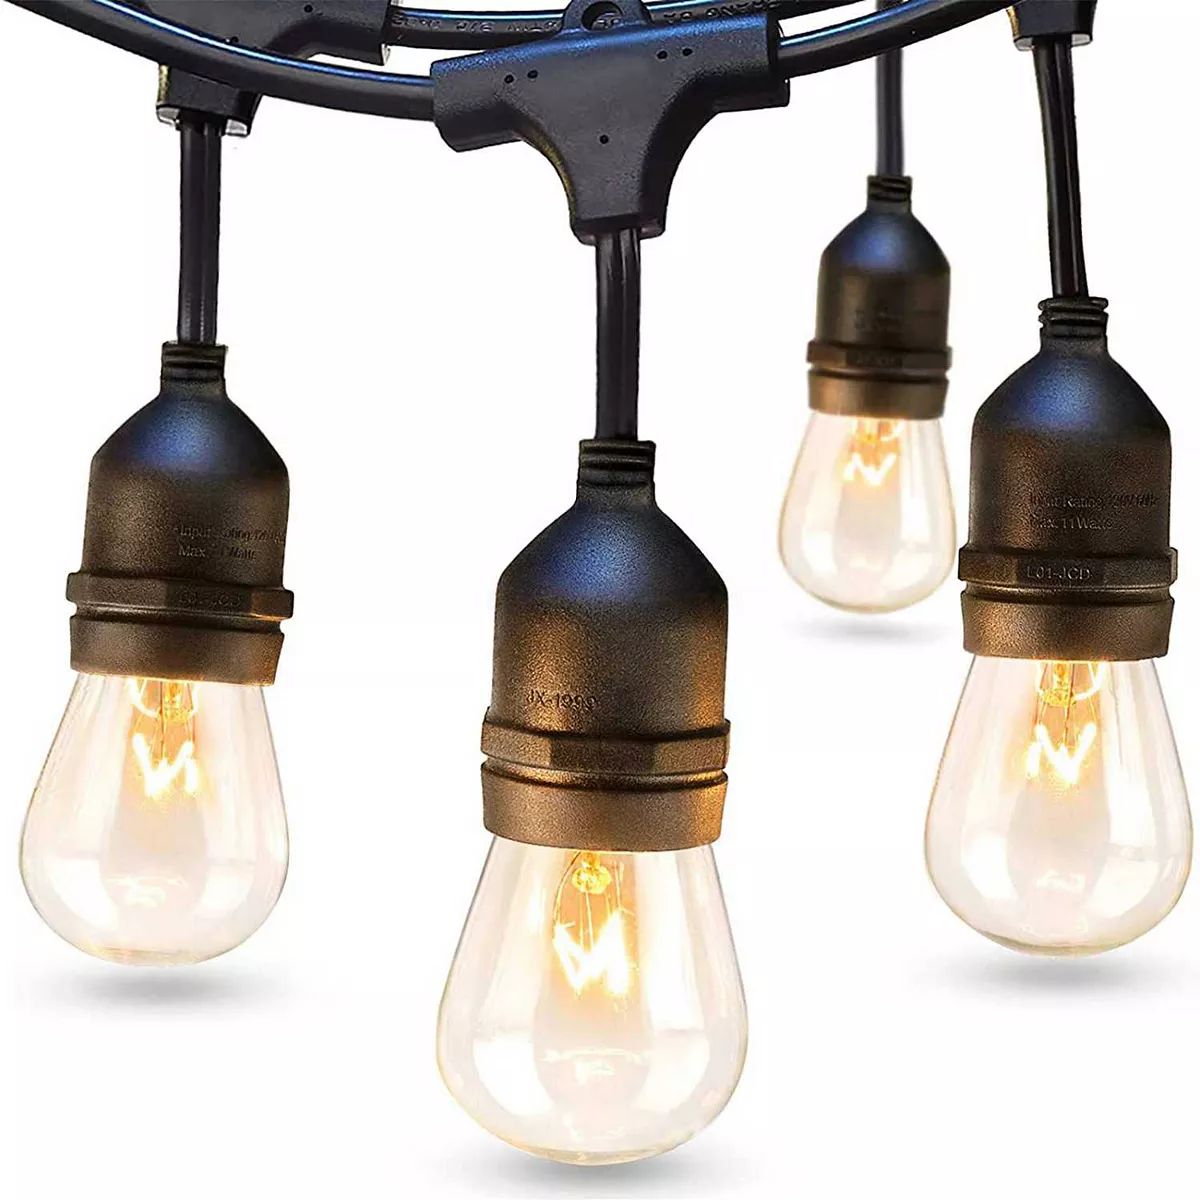 Outdoor Patio String Lights | Kohl's